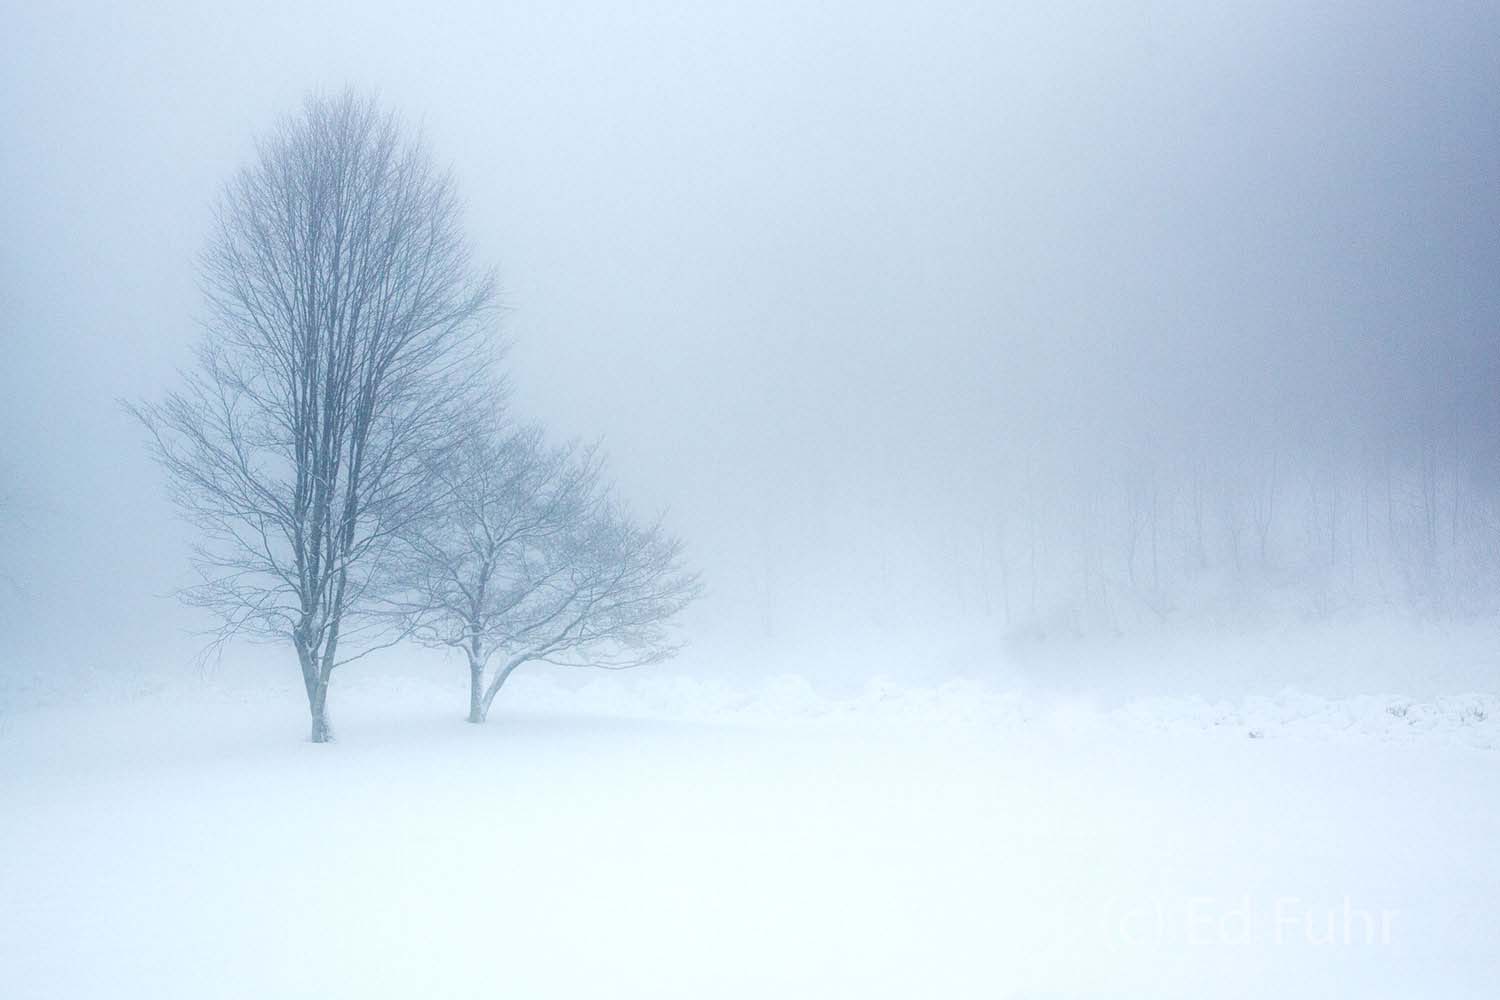 A single dogwood and small oak are barely visible in the snow and fog along Skyline Drive.